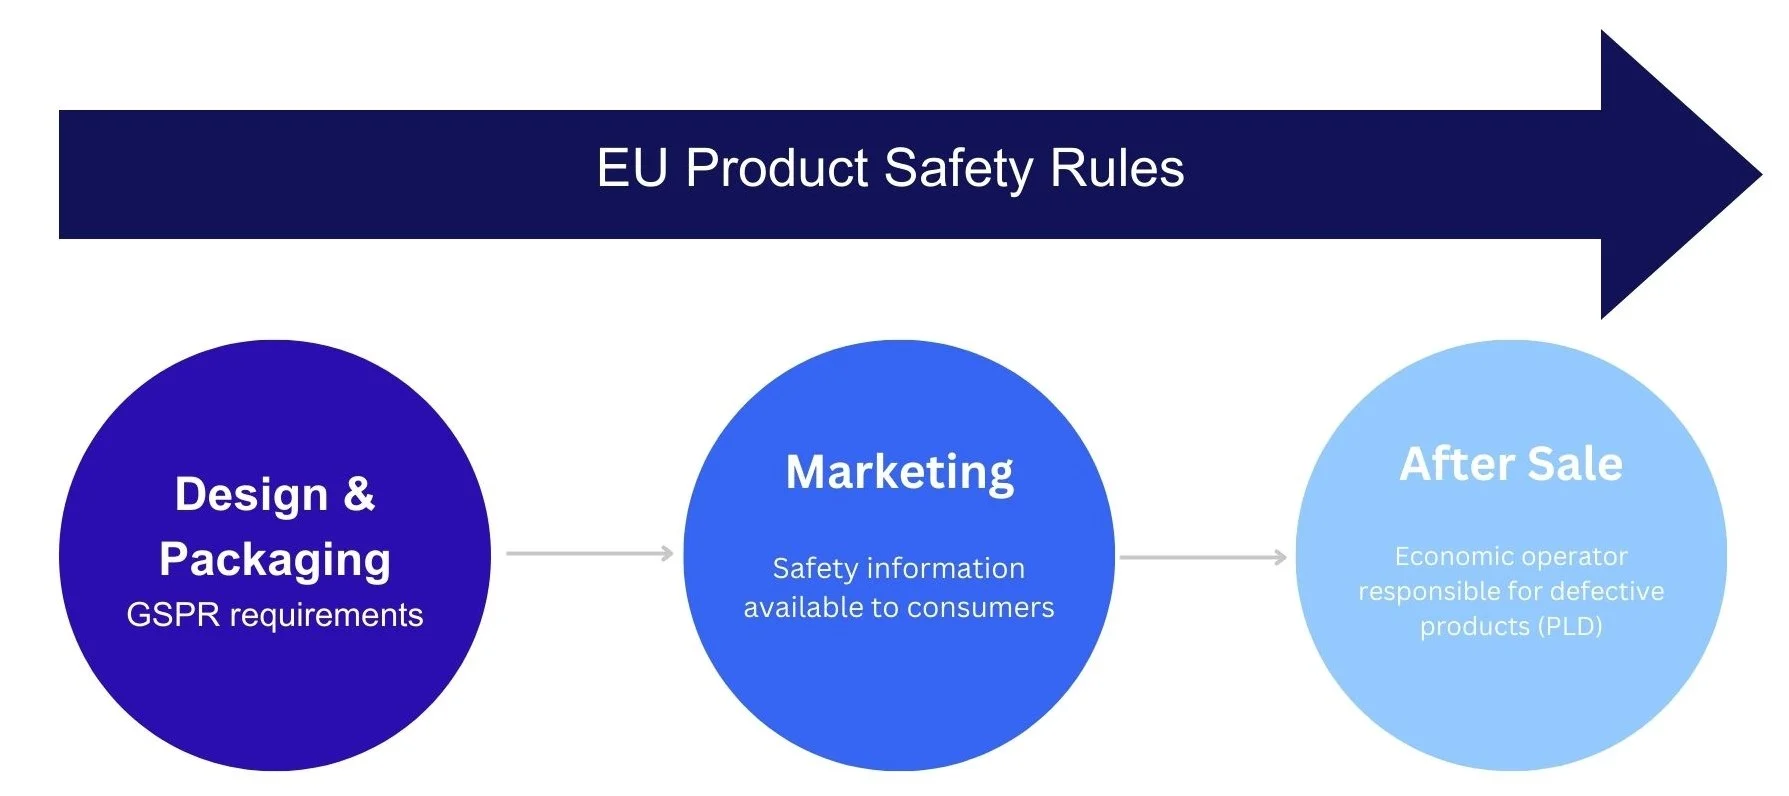 EU Product Safety Rules